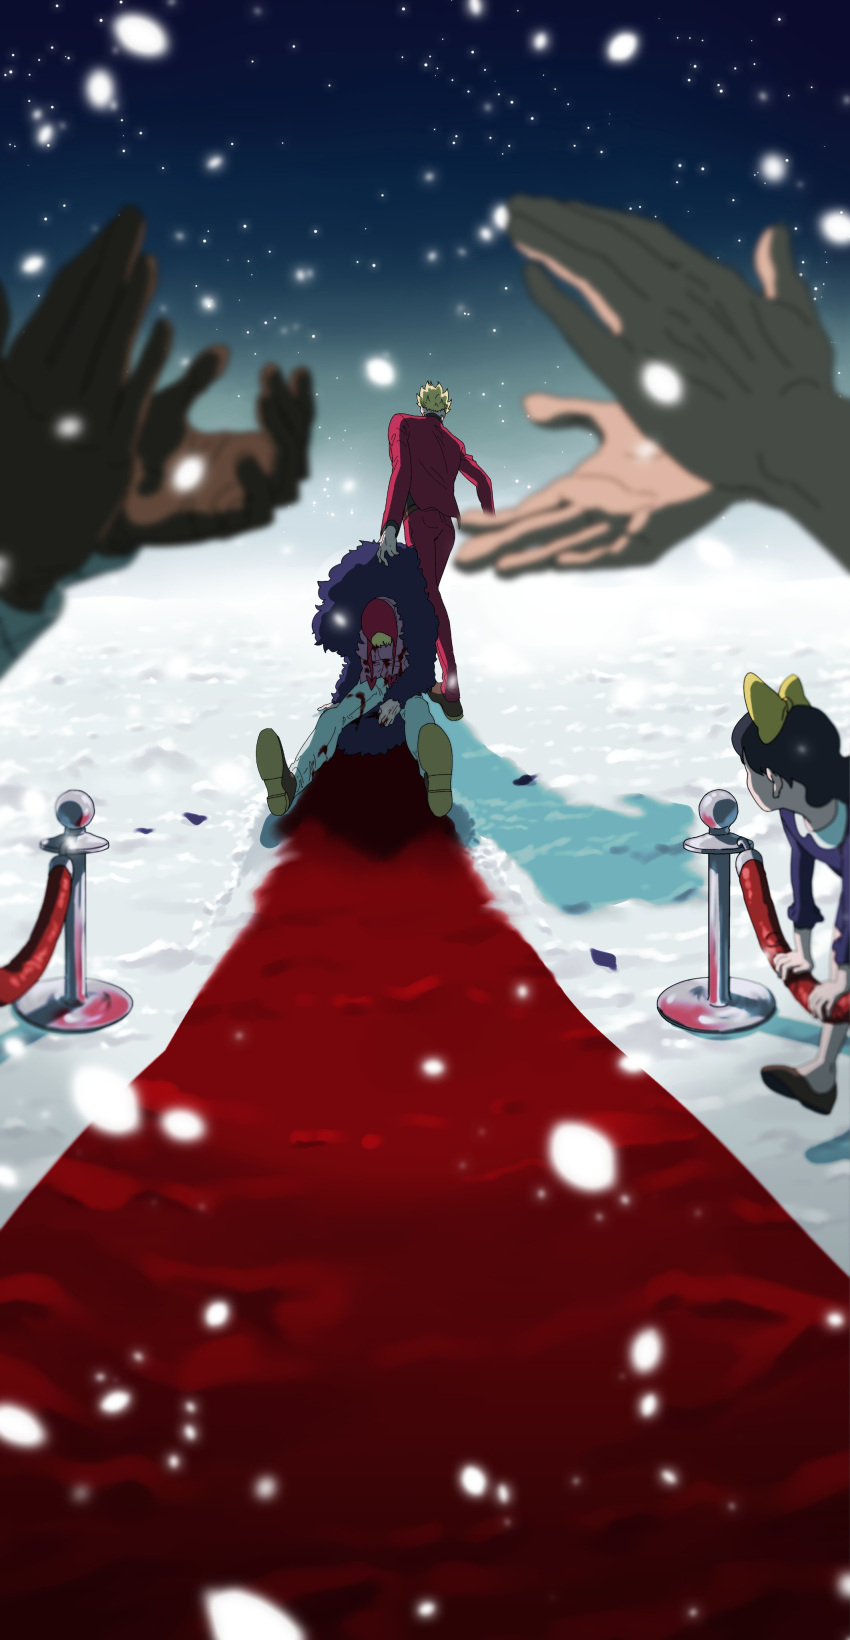 1girl 2boys absurdres aged_down baby_5 black_coat black_hair blonde_hair blood blurry blurry_foreground bow brothers clapping coat death disembodied_limb donquixote_doflamingo donquixote_rocinante dragging dress from_behind hair_bow highres lawcoegg long_hair multiple_boys night one_piece outdoors purple_dress red_carpet red_hood red_suit short_hair siblings snow snowing suit yellow_bow